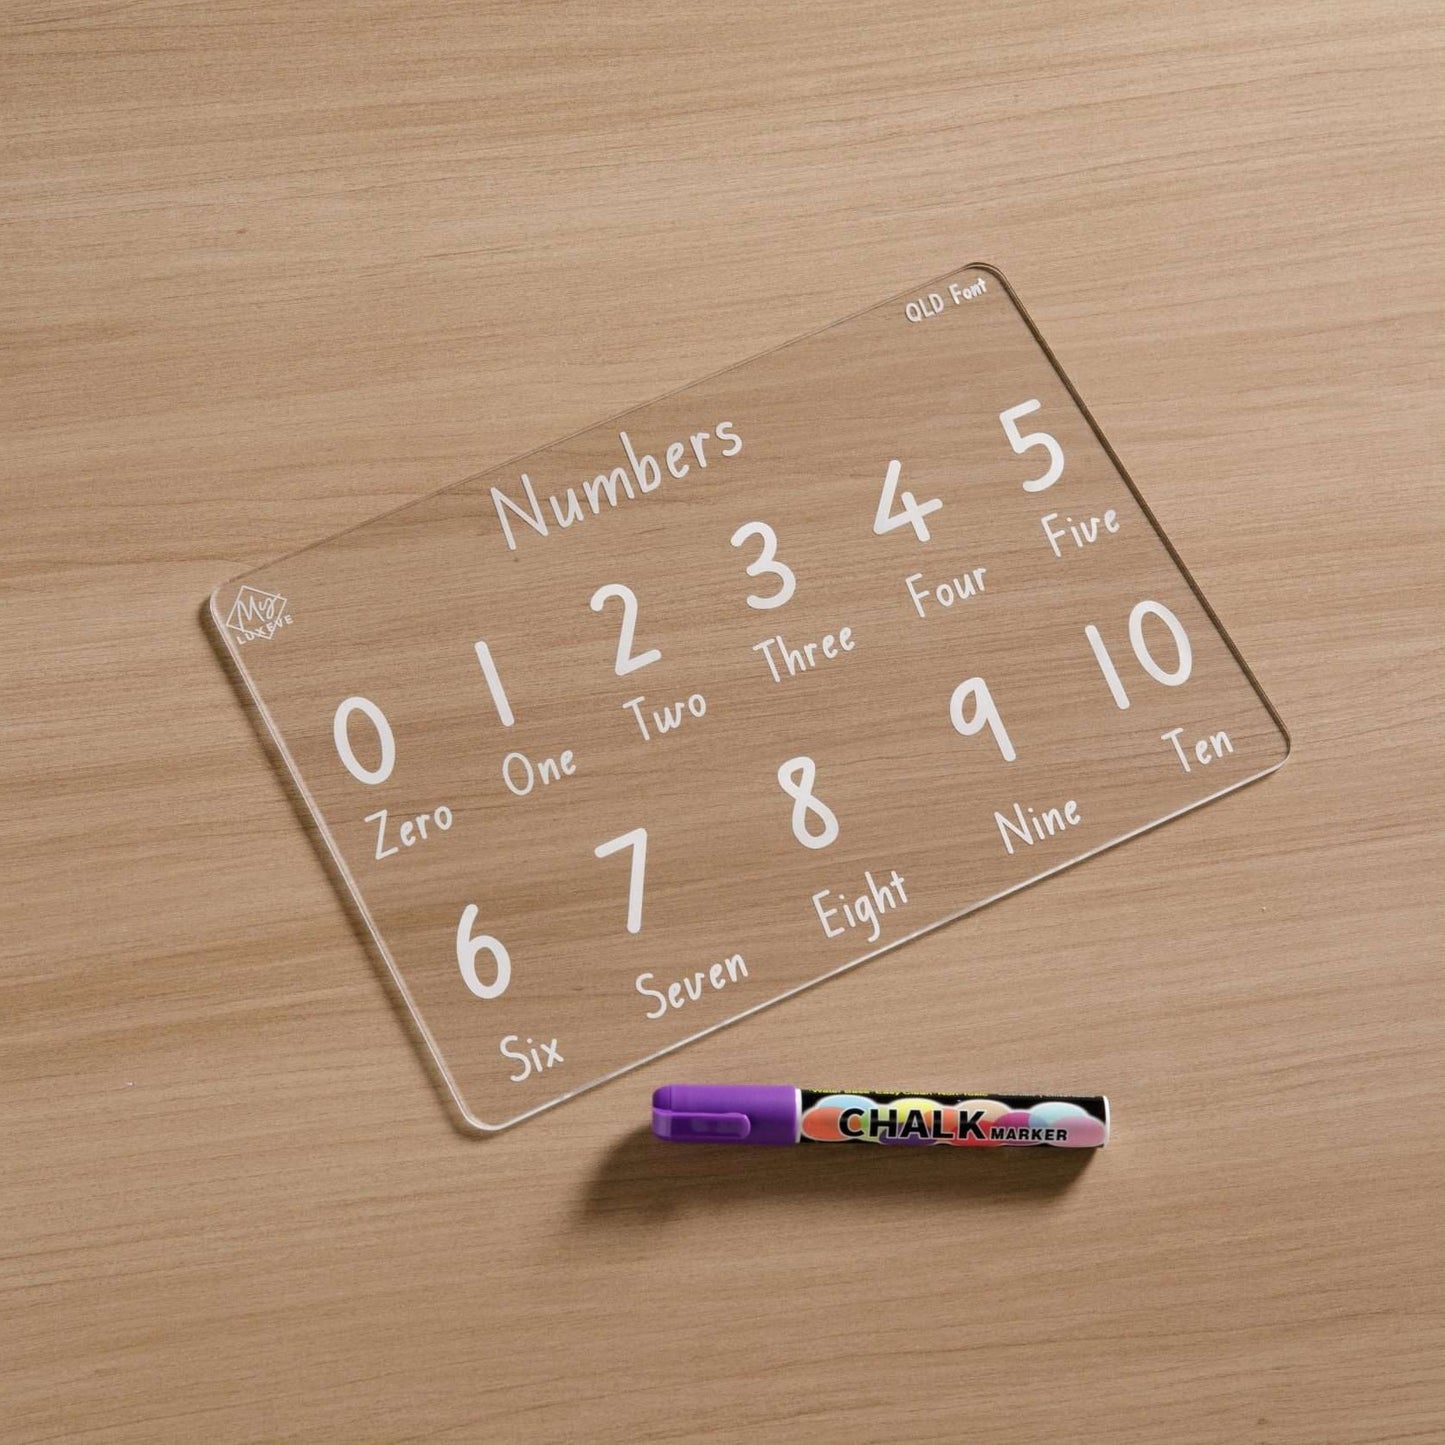 Numbers Learning Board with Chalk Marker